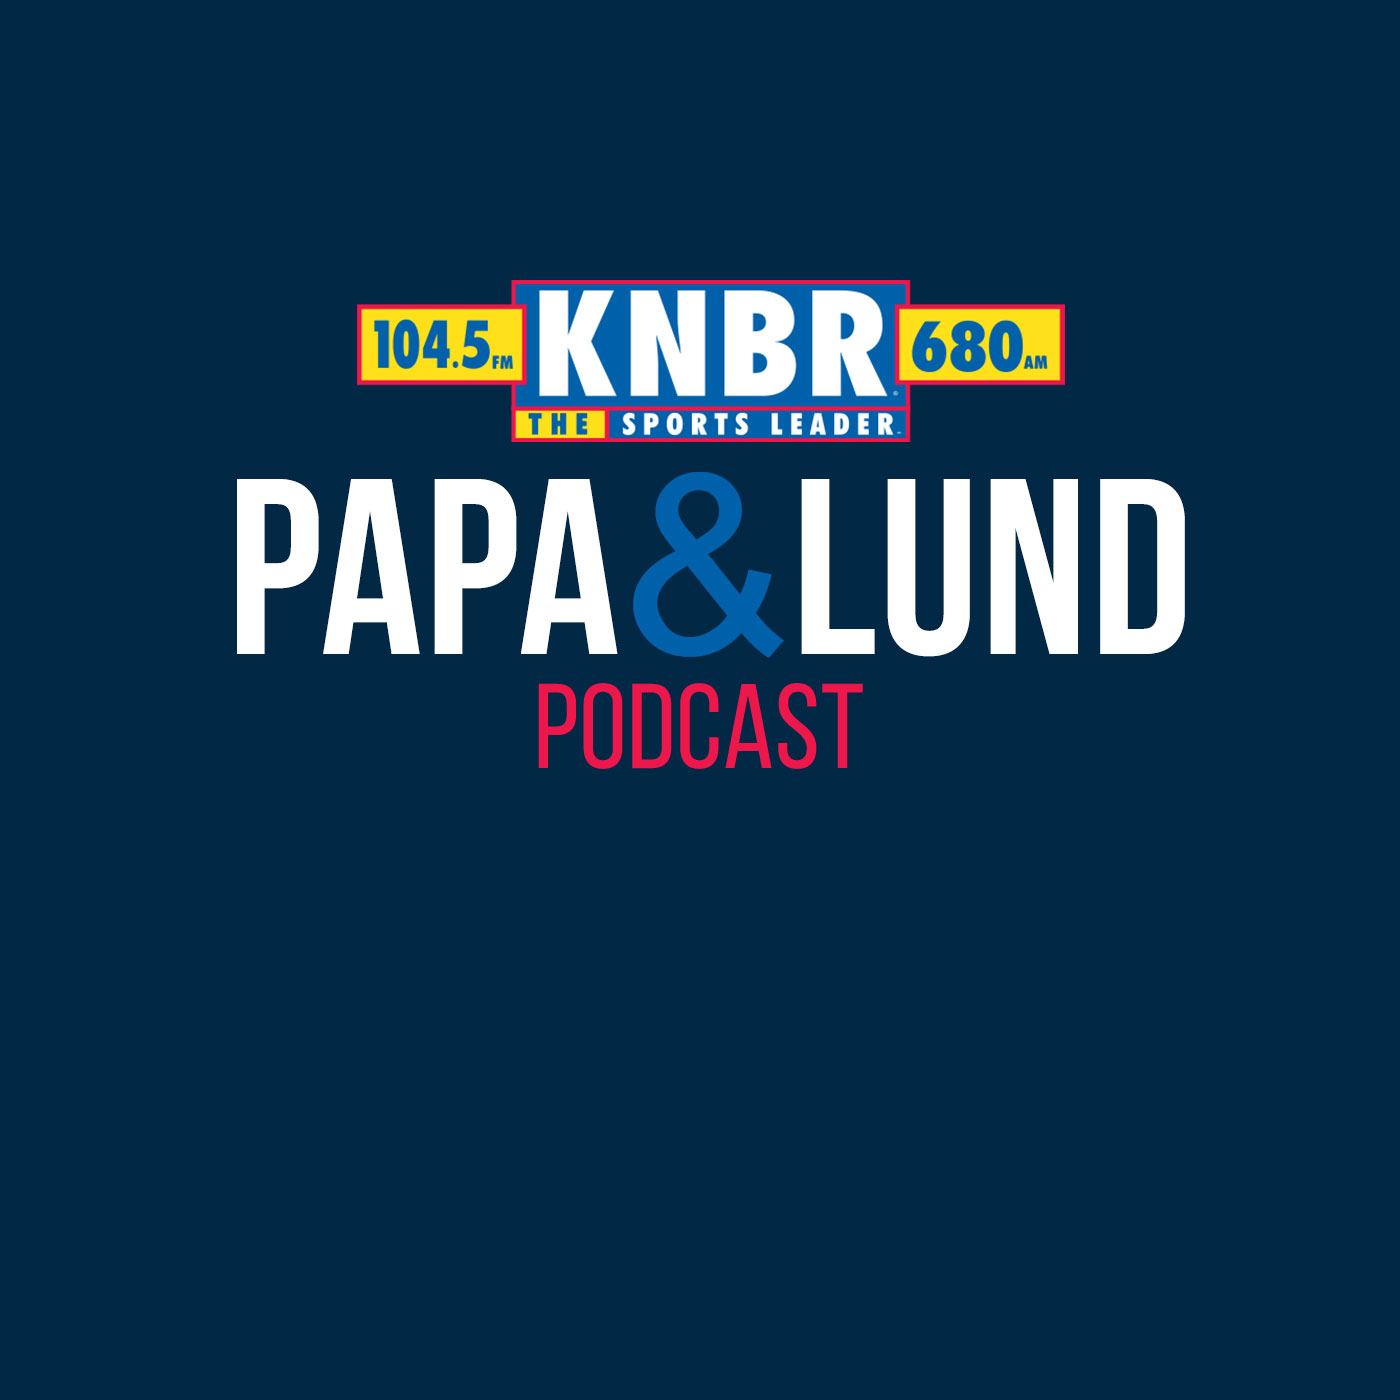 11-8 John Shea joins Papa & Lund to discuss the latest from the GM Meetings and whether or not the Giants have a shot at Ohtani and who else would be on the table this offseason for the Giants